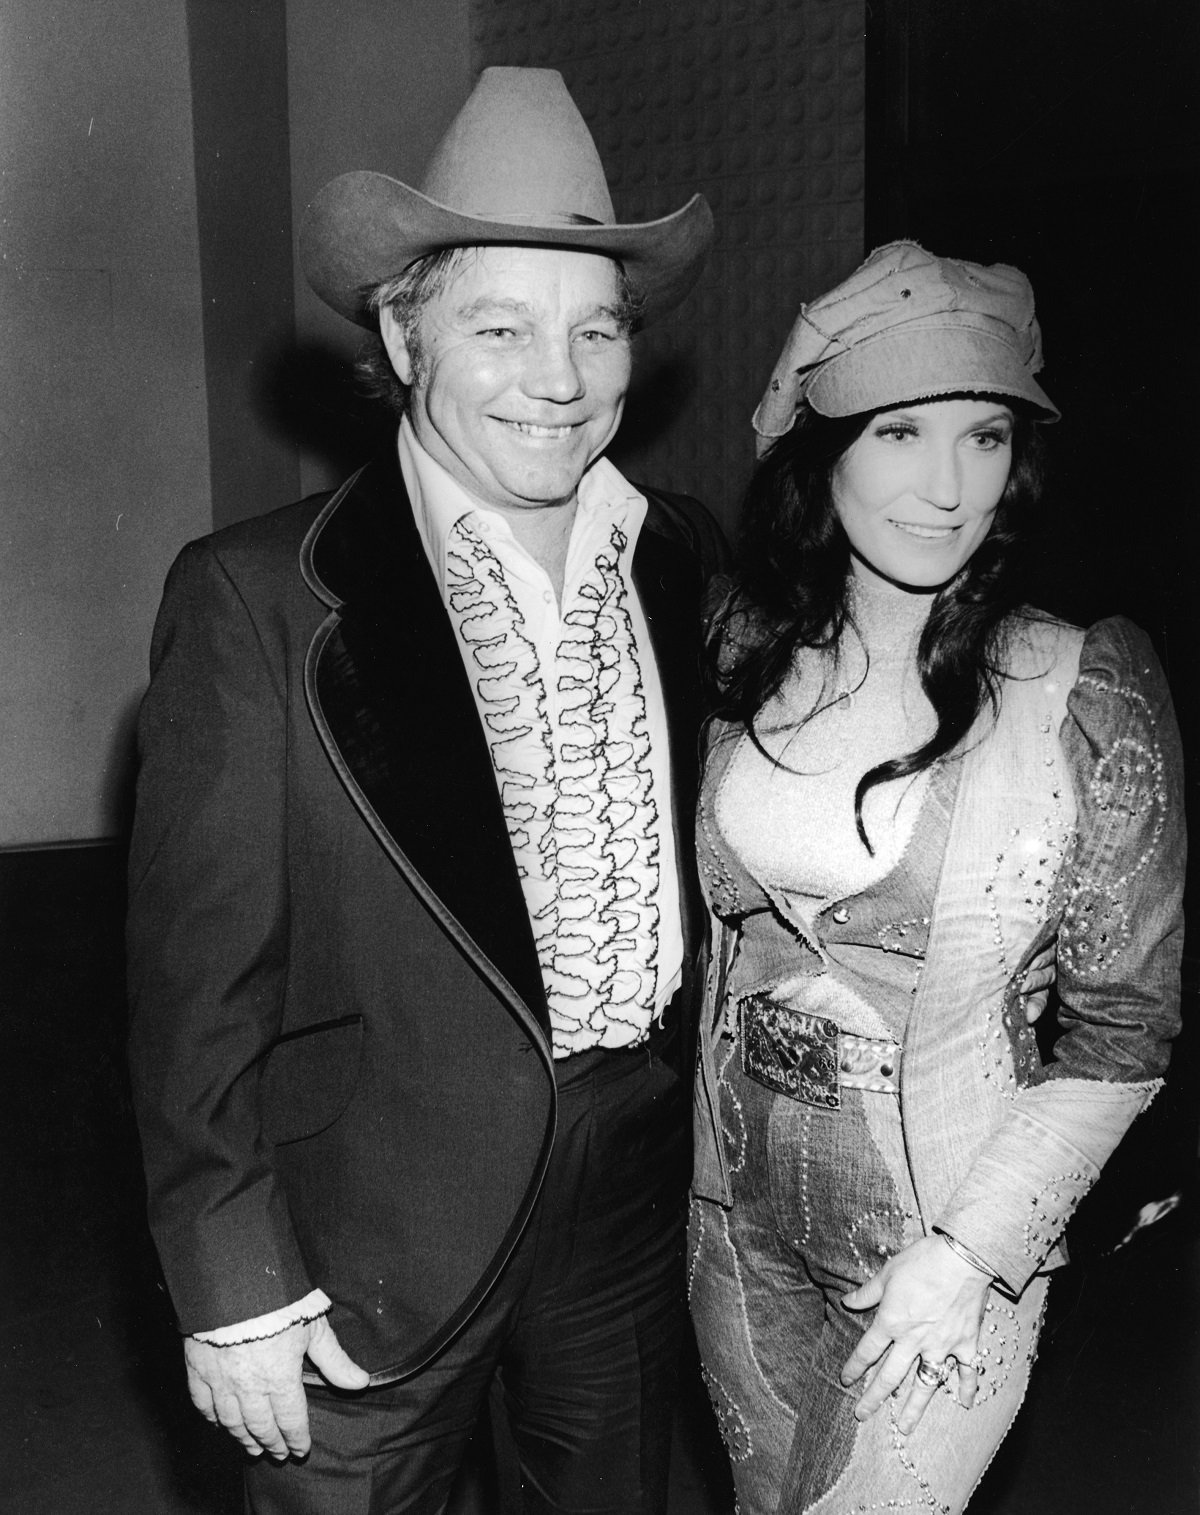 Loretta Lynn and her husband Oliver "Doolittle" Vanetta on February 27, 1975 | Source: Getty Images